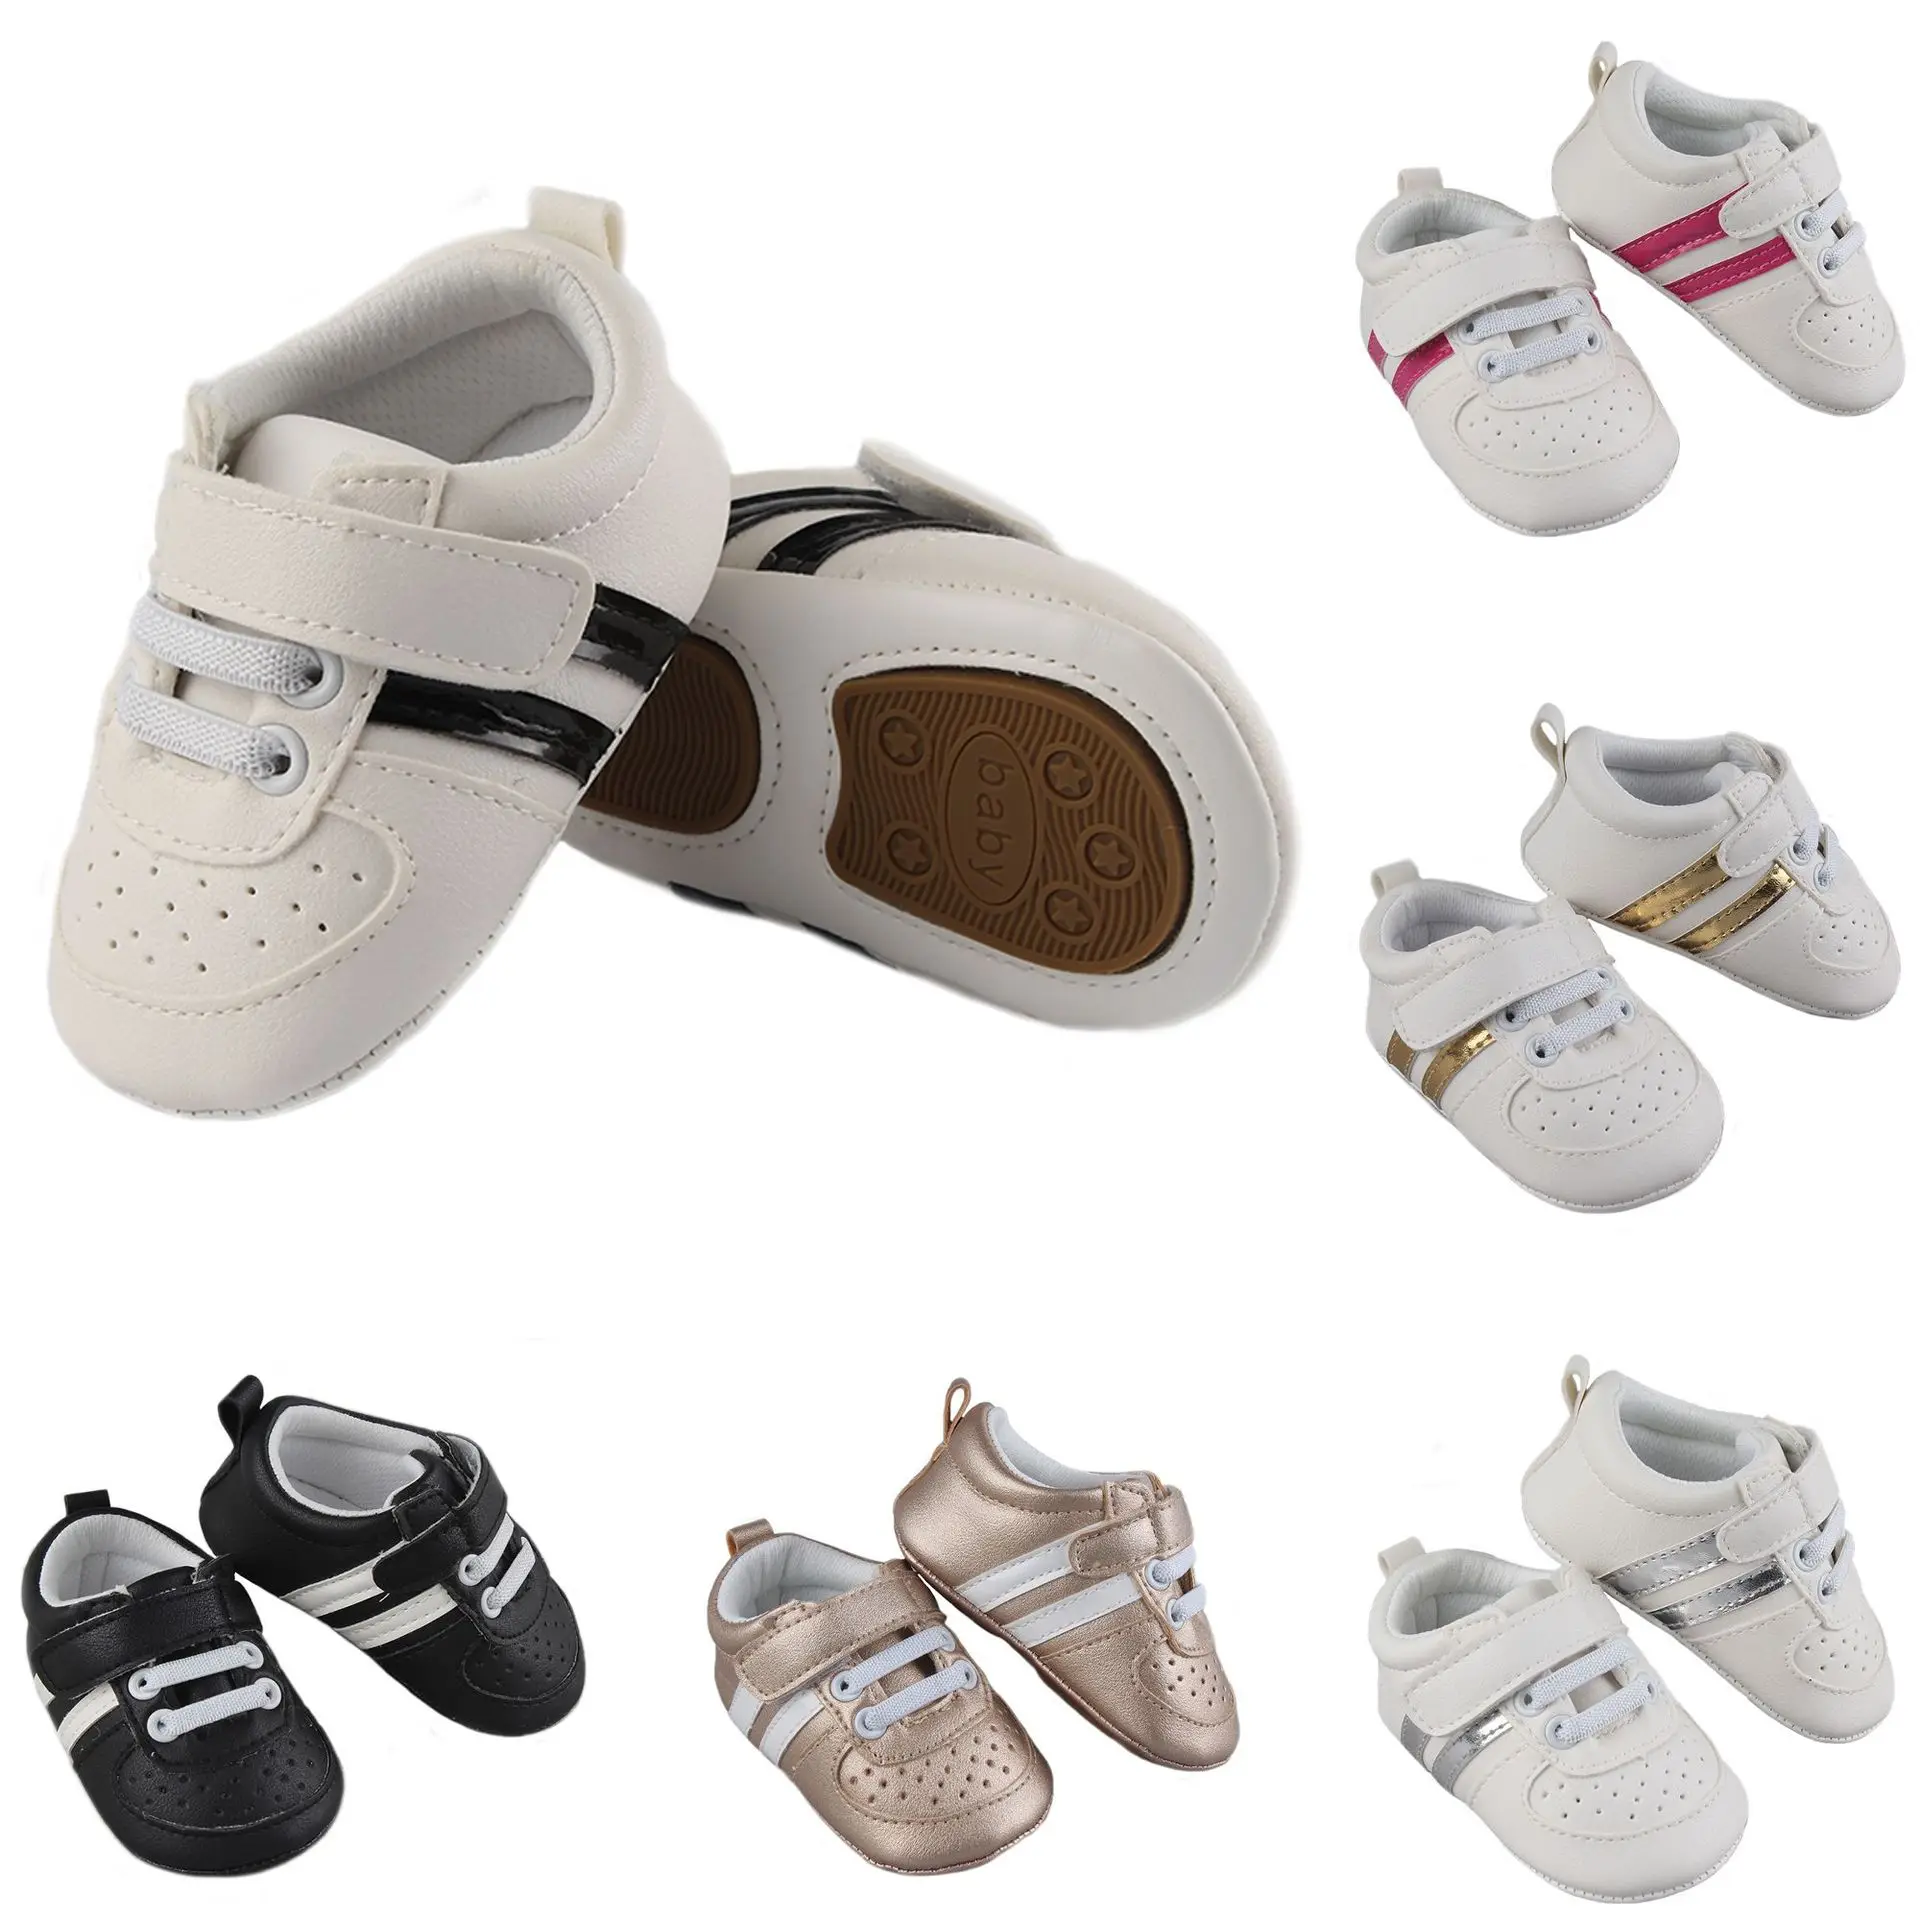 

Wholesale Toddler white waterproof casual new born leather mary jane boy girl baby shoes, Mix color avalibale ( baby shoe)